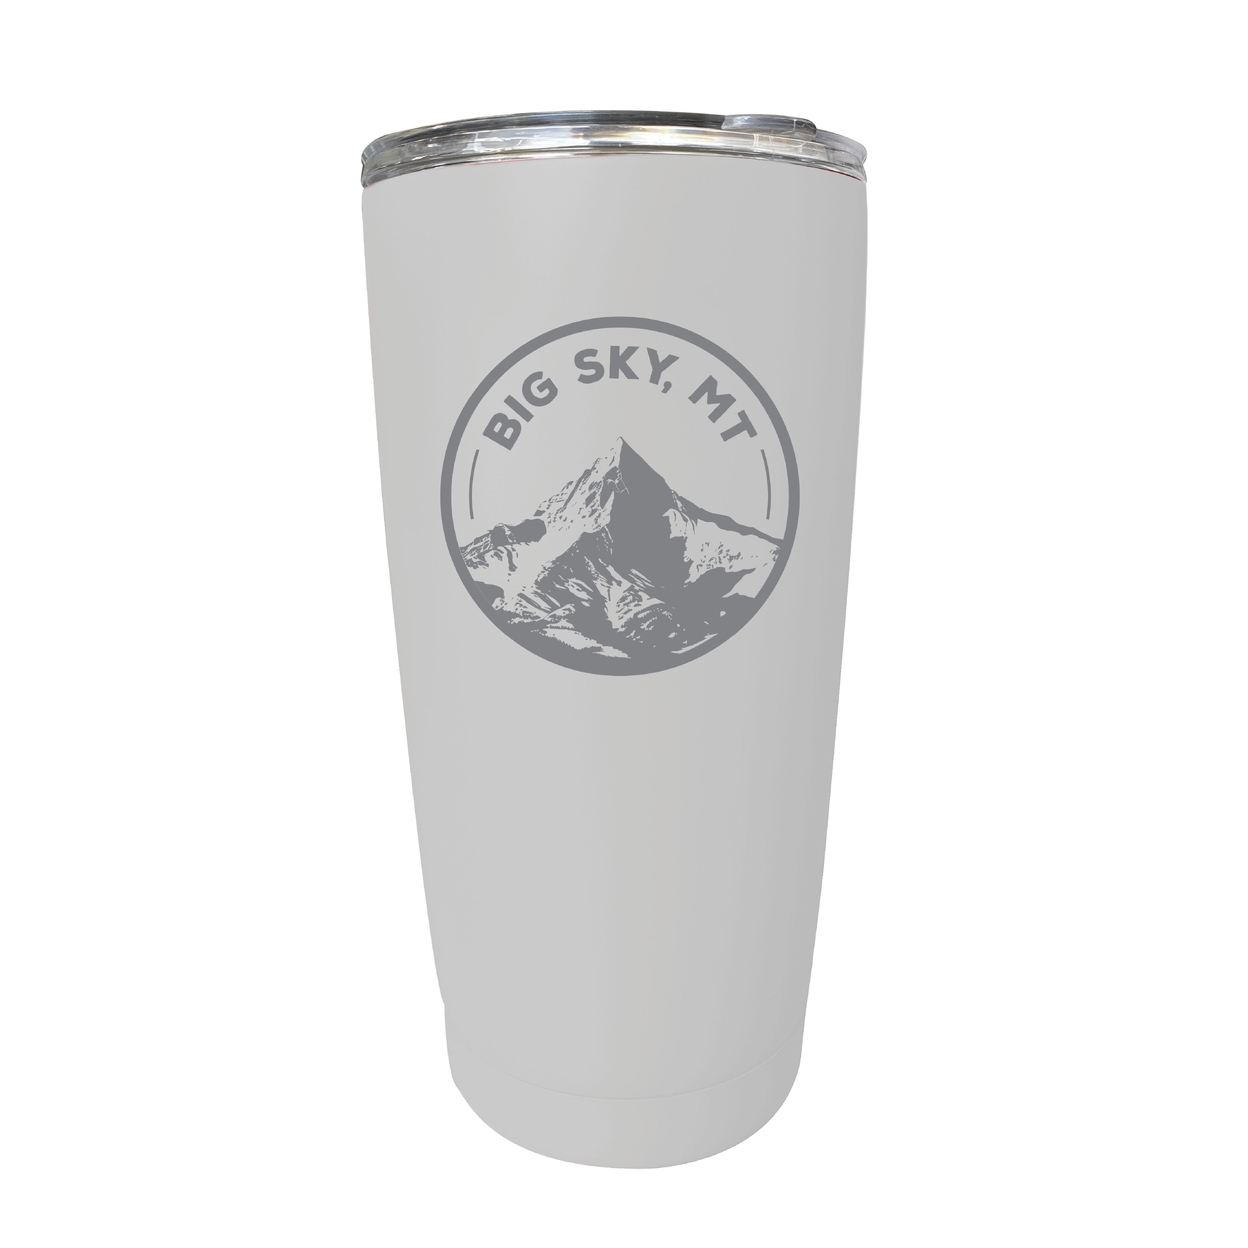 Big Sky Montana Souvenir 16 Oz Engraved Stainless Steel Insulated Tumbler - White,,4-Pack